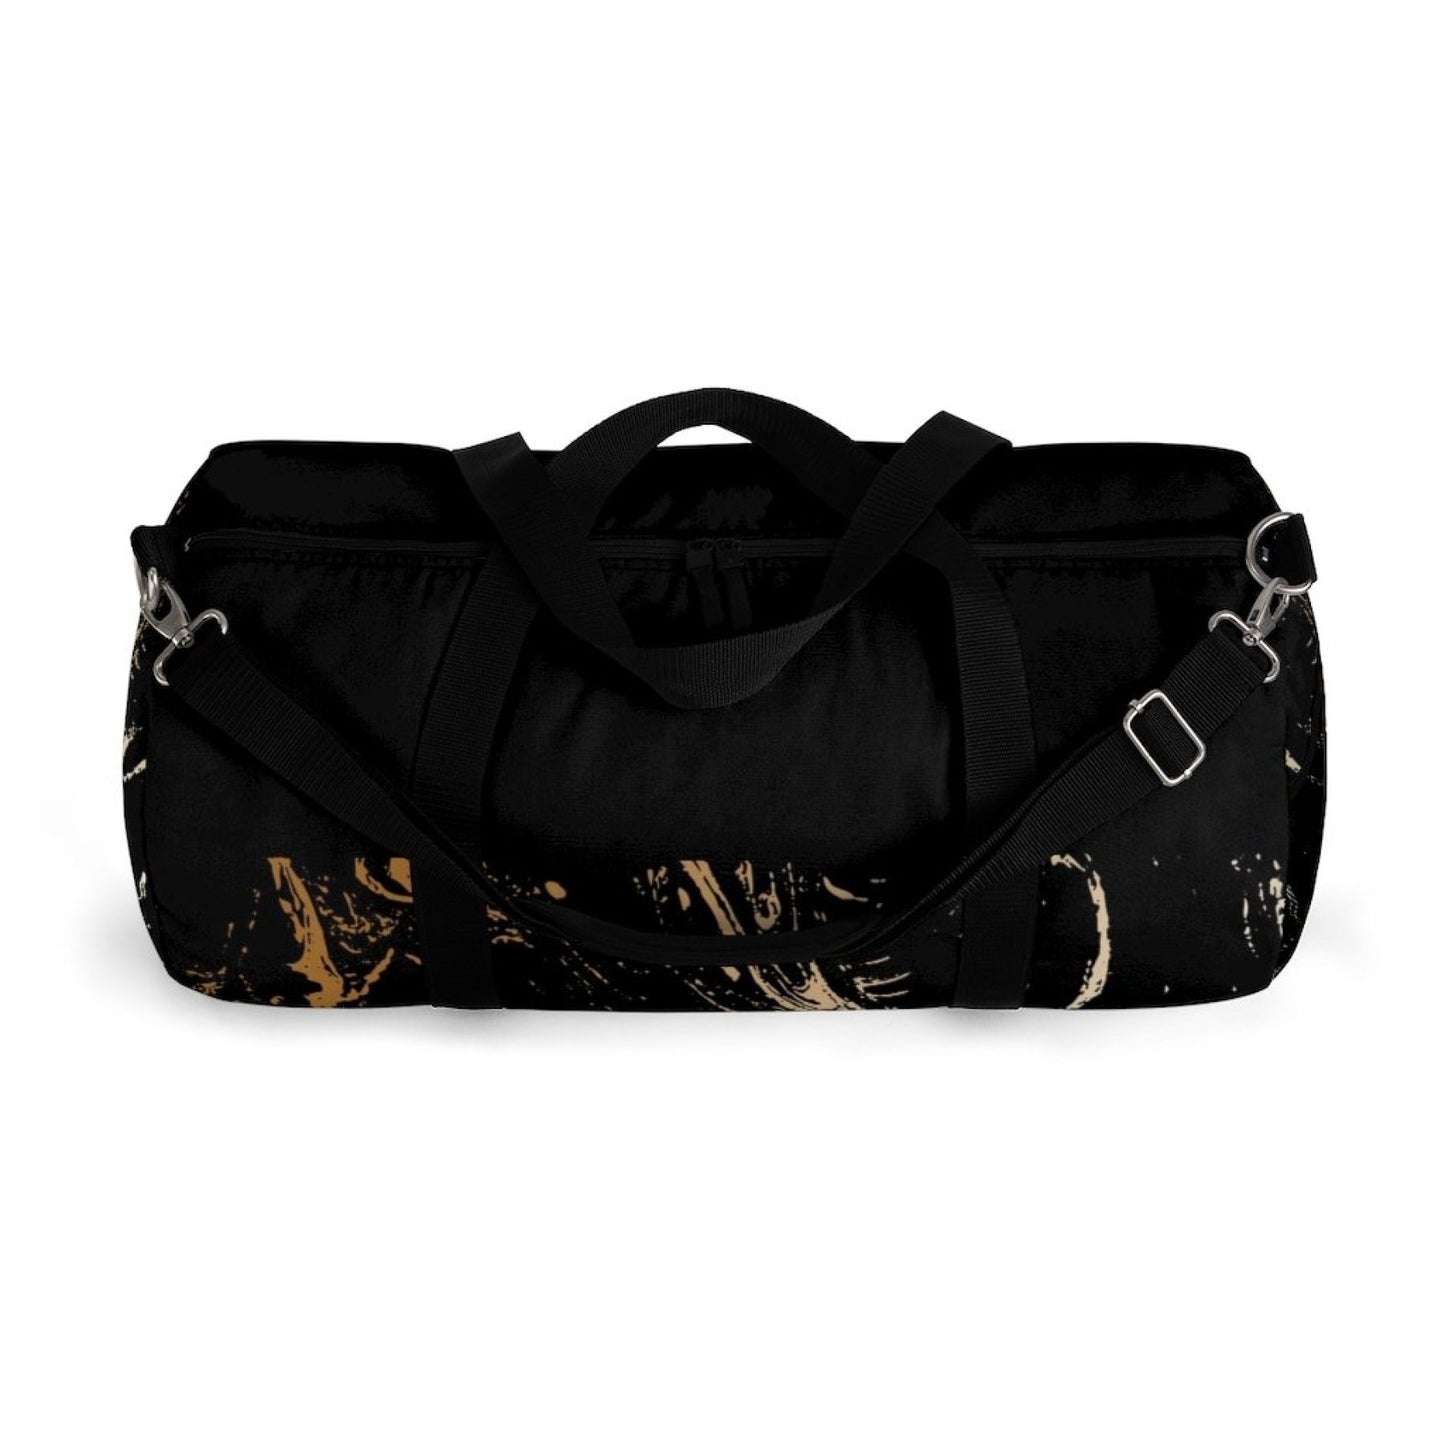 Uniquely You Duffel Bag Black and Gold